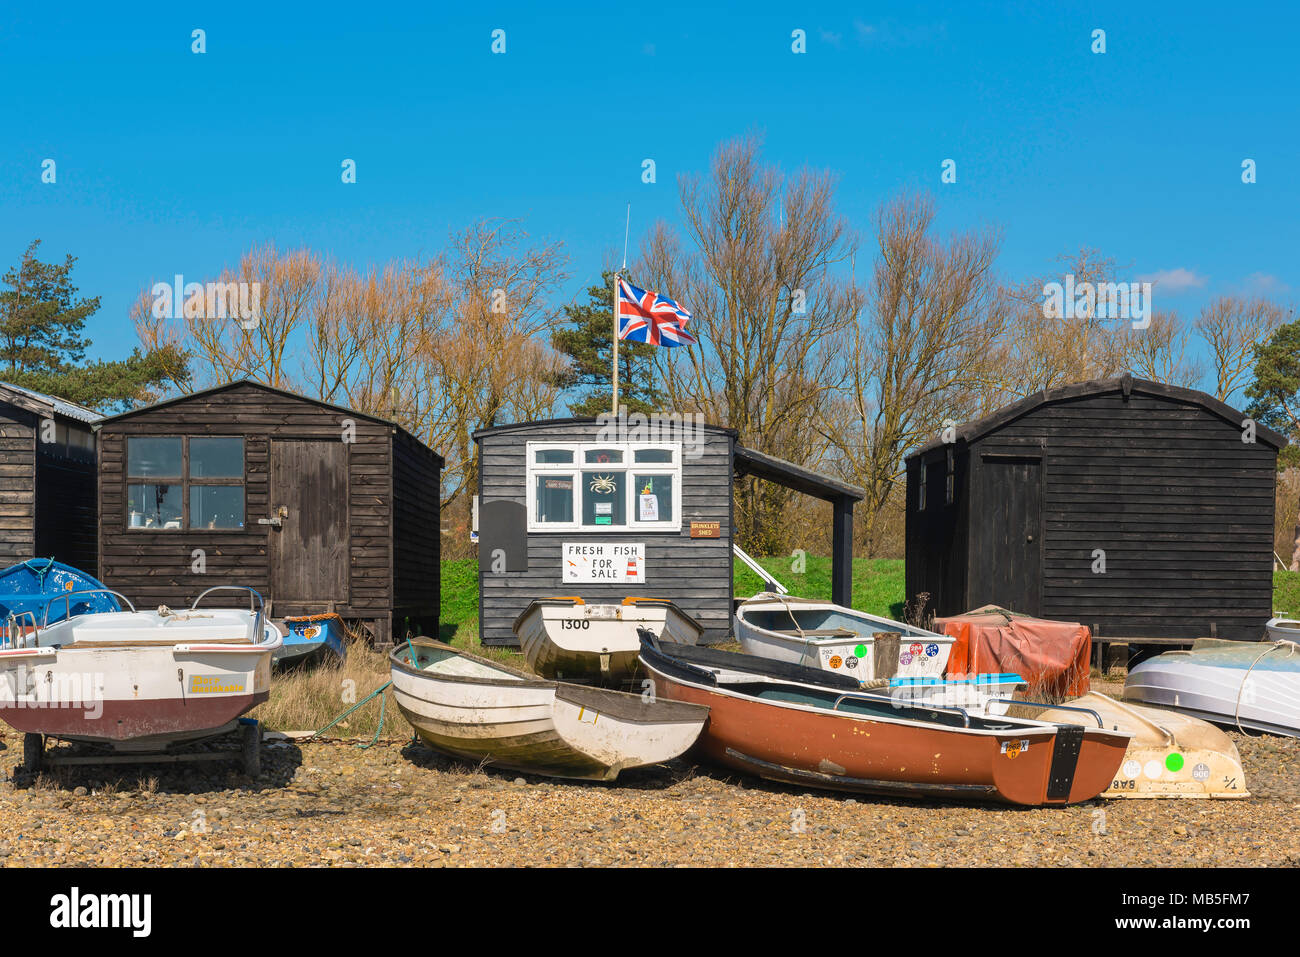 England beach UK, view of boats and fishermens' huts on the beach at Orford, Suffolk, East Anglia, England, UK. Stock Photo